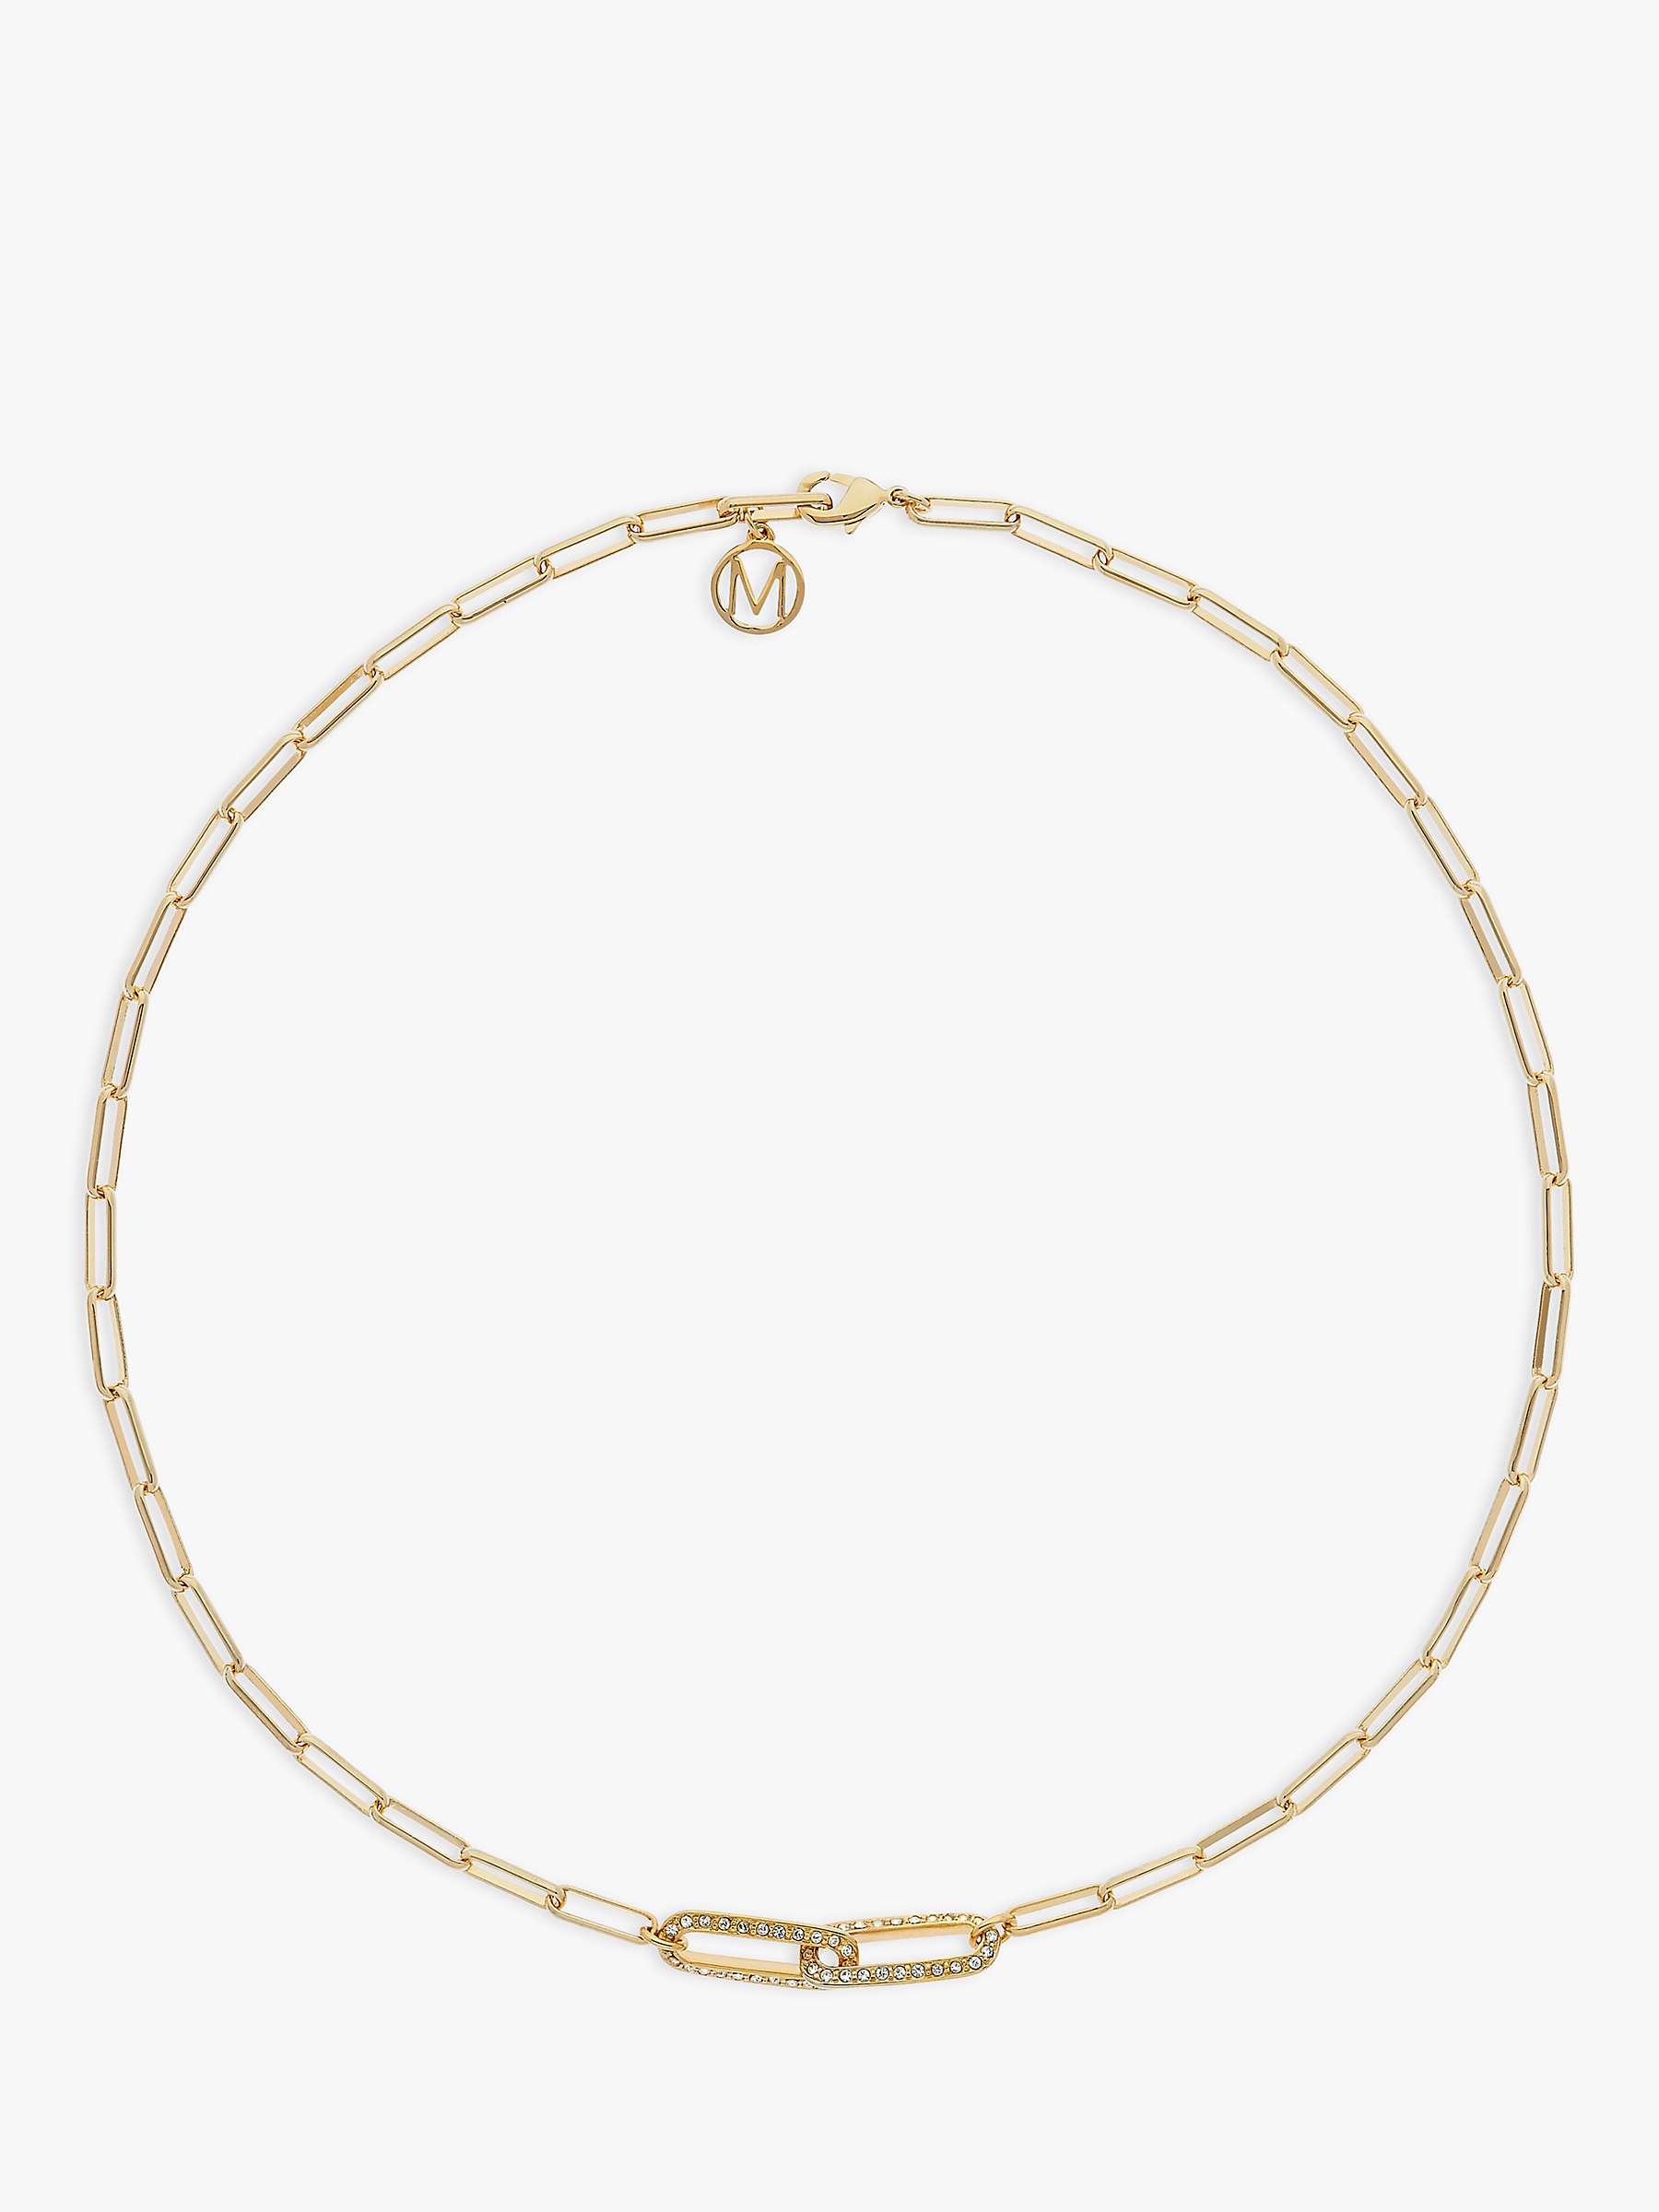 Buy Melissa Odabash Austrian Crystal Paperclip Chain Collar Necklace, Gold Online at johnlewis.com